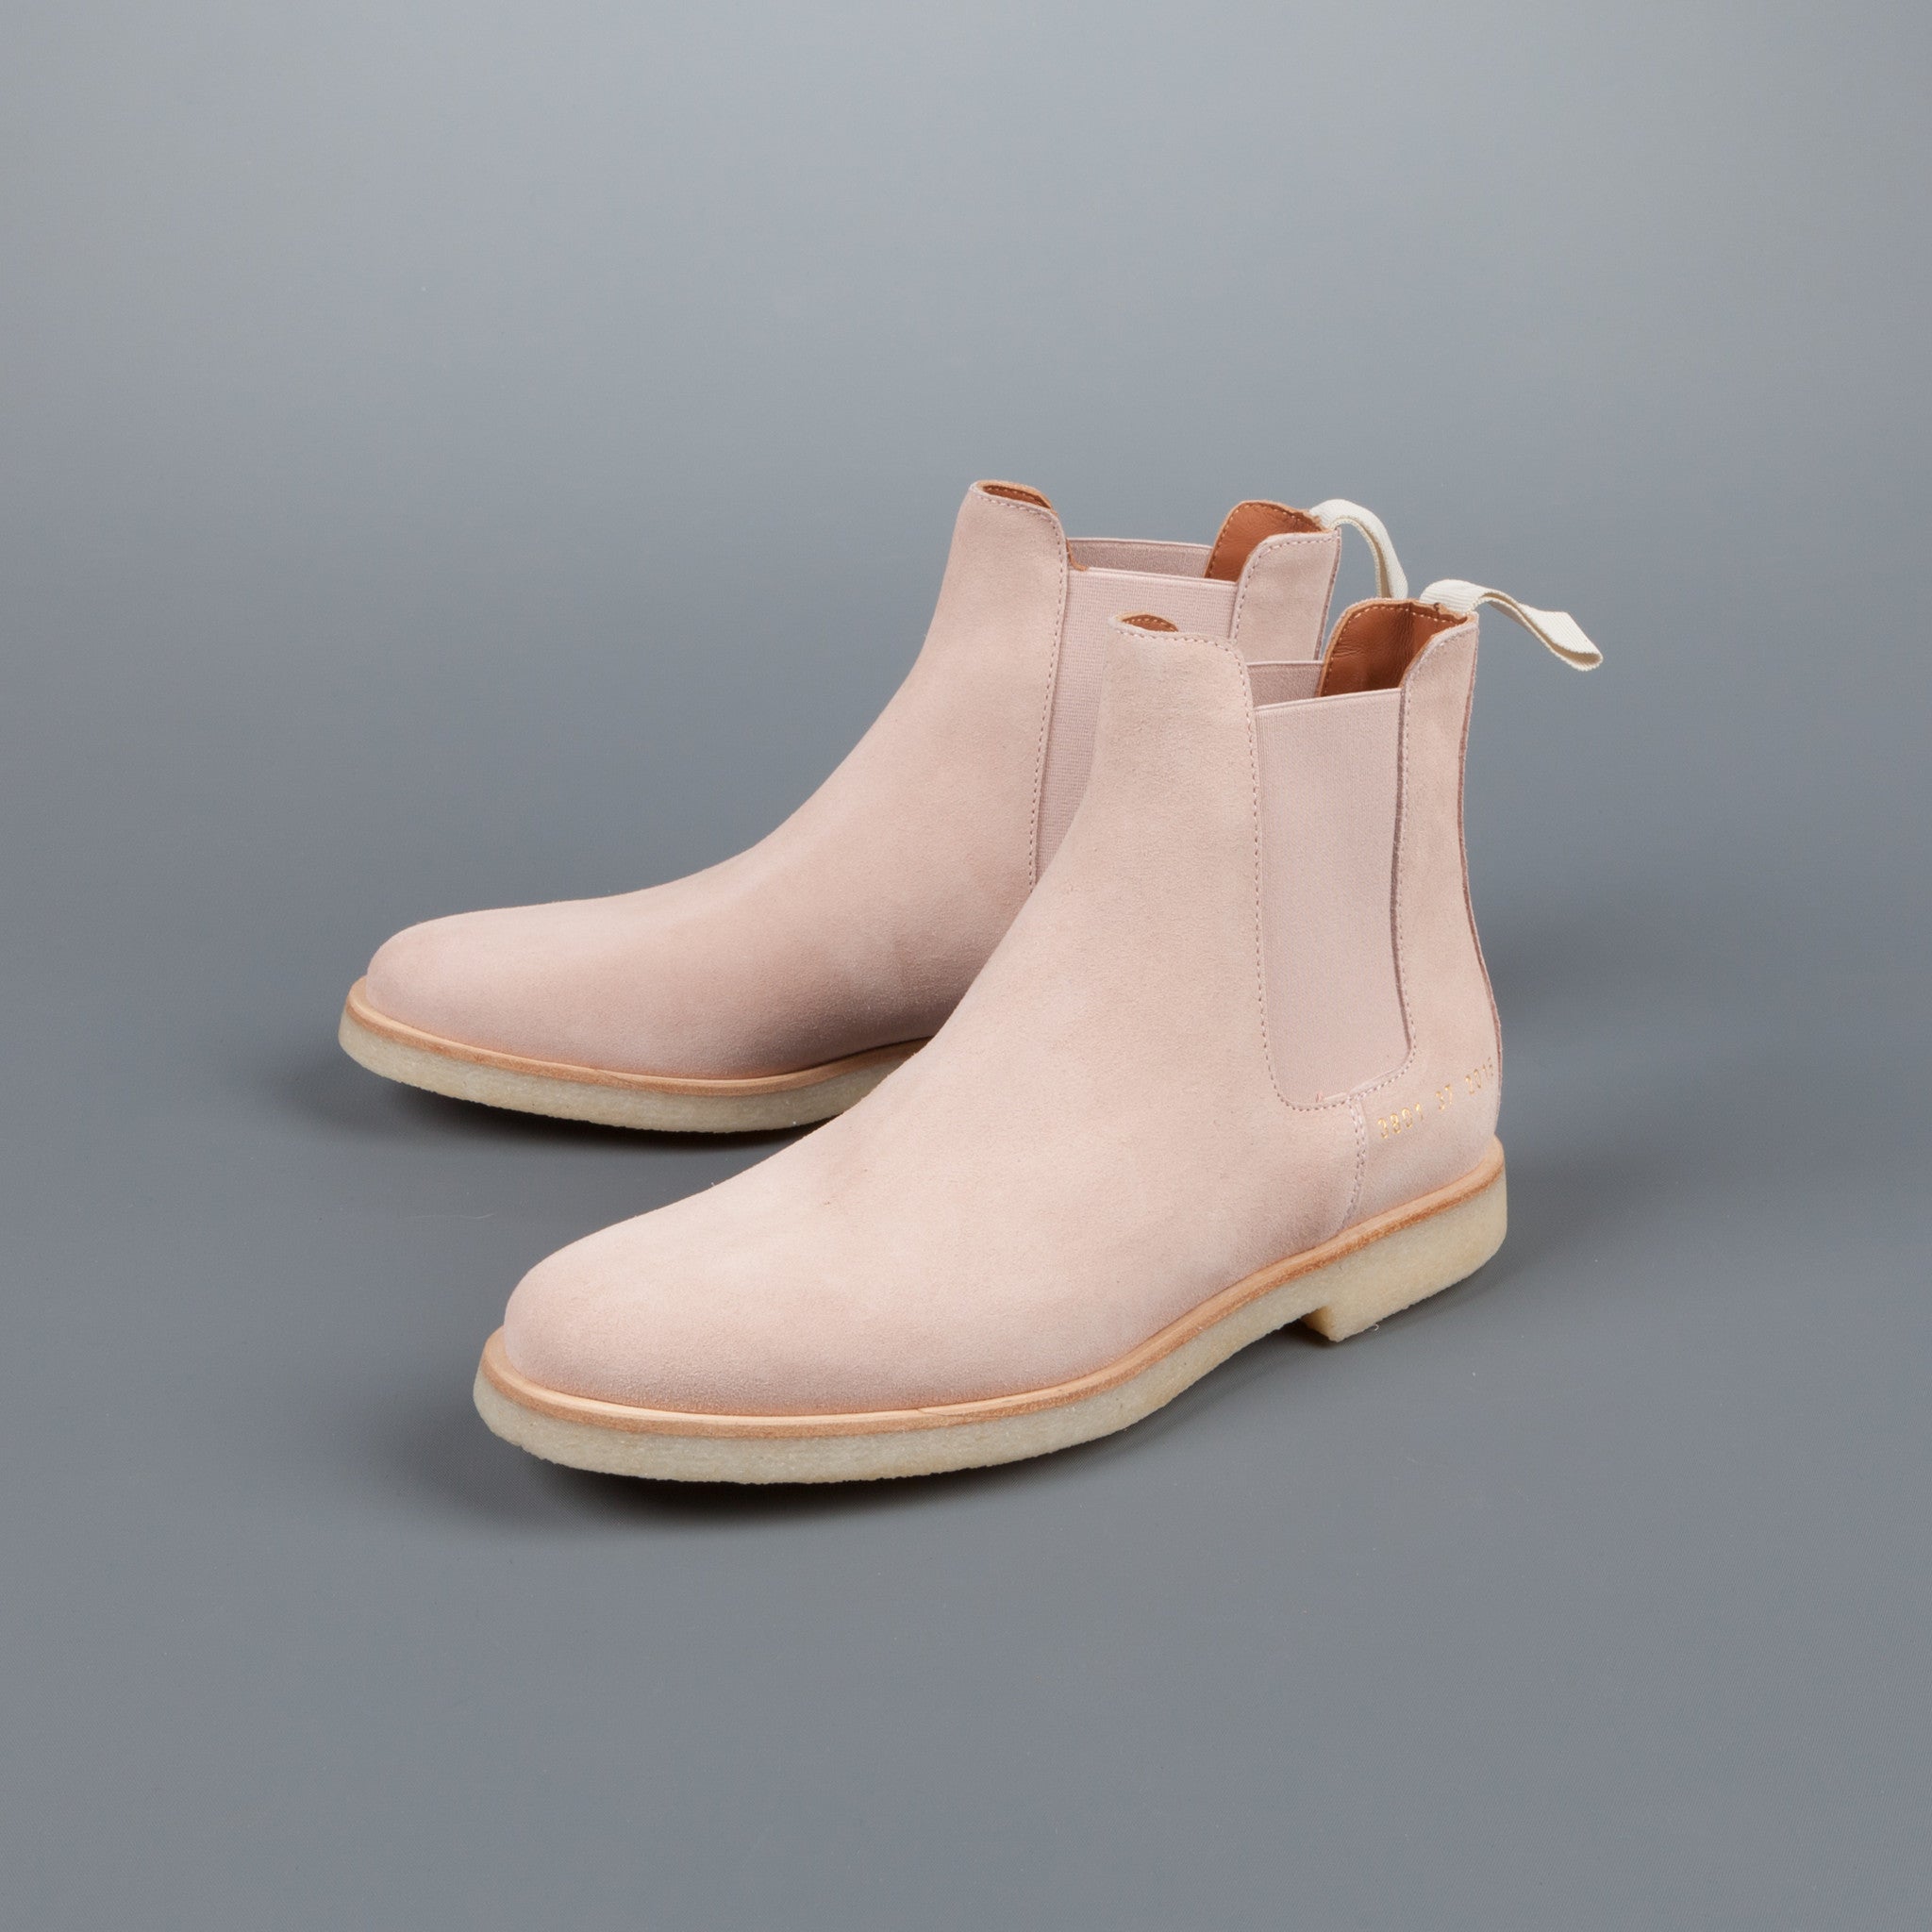 Common Projects Woman by Common Projects Chelsea boot in Blush Suede – Boone Store